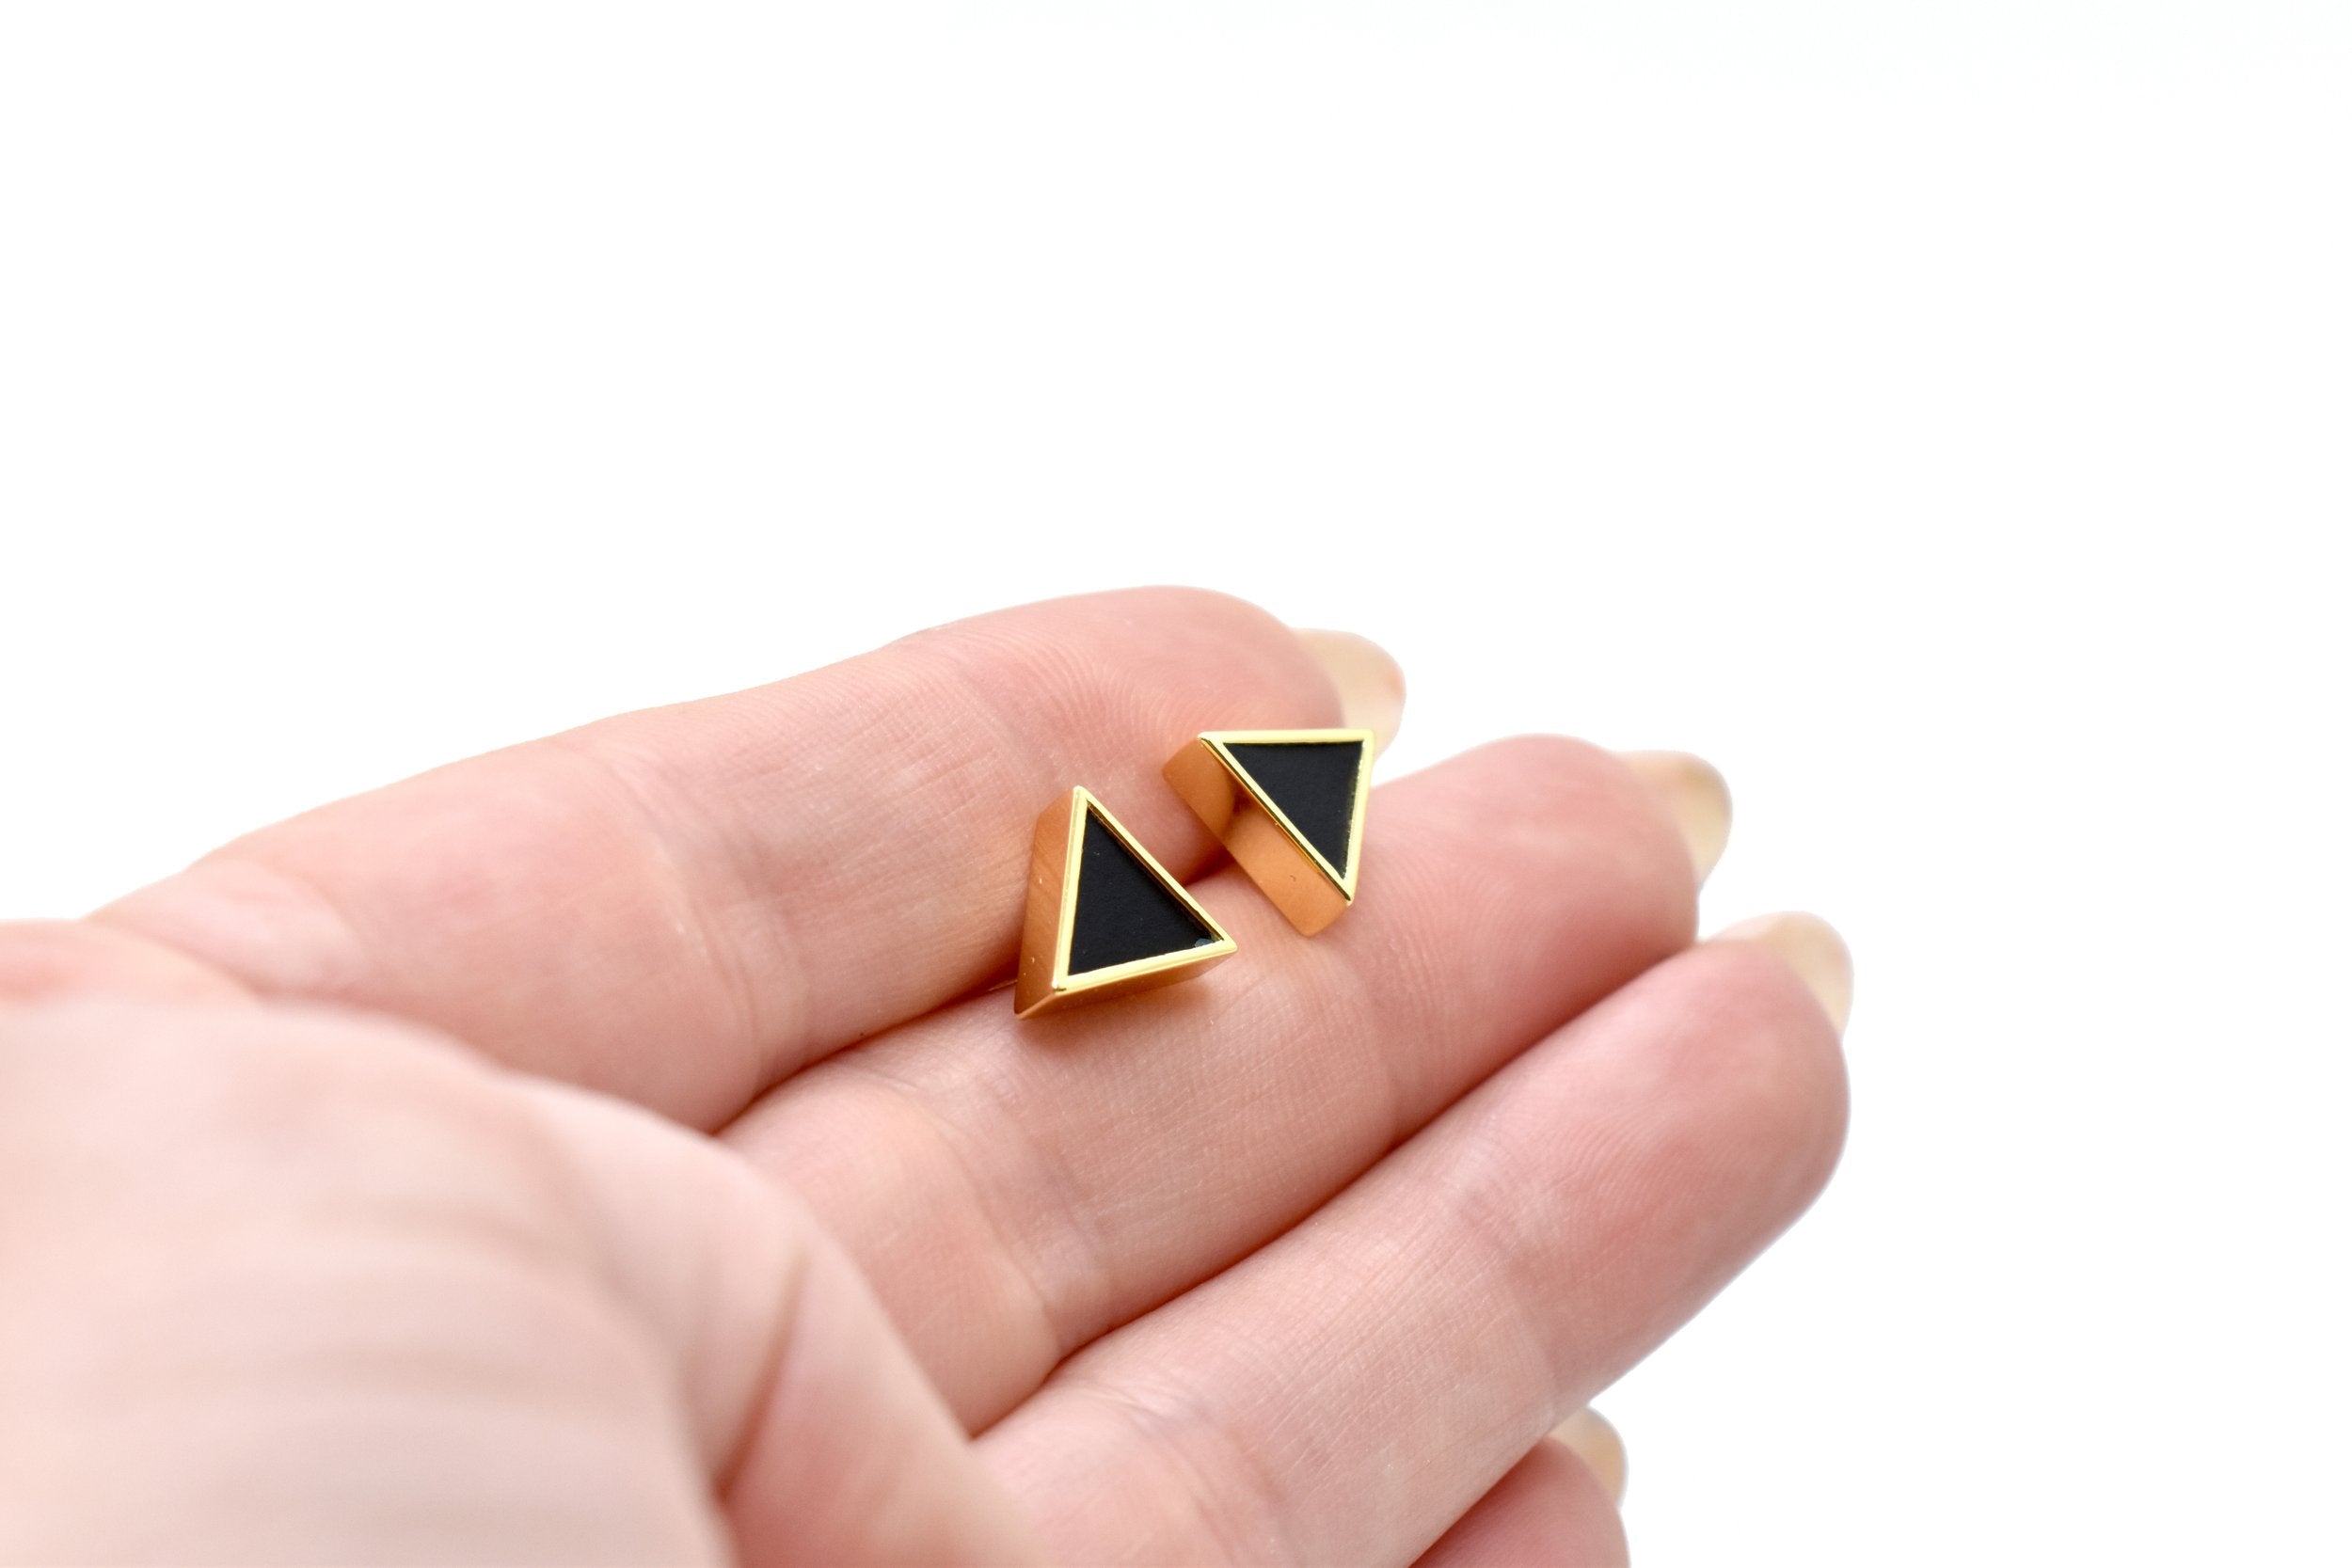 hand holding a pair of gold geometric triangle stud earring set in 14k gold plating good for sensitive ears